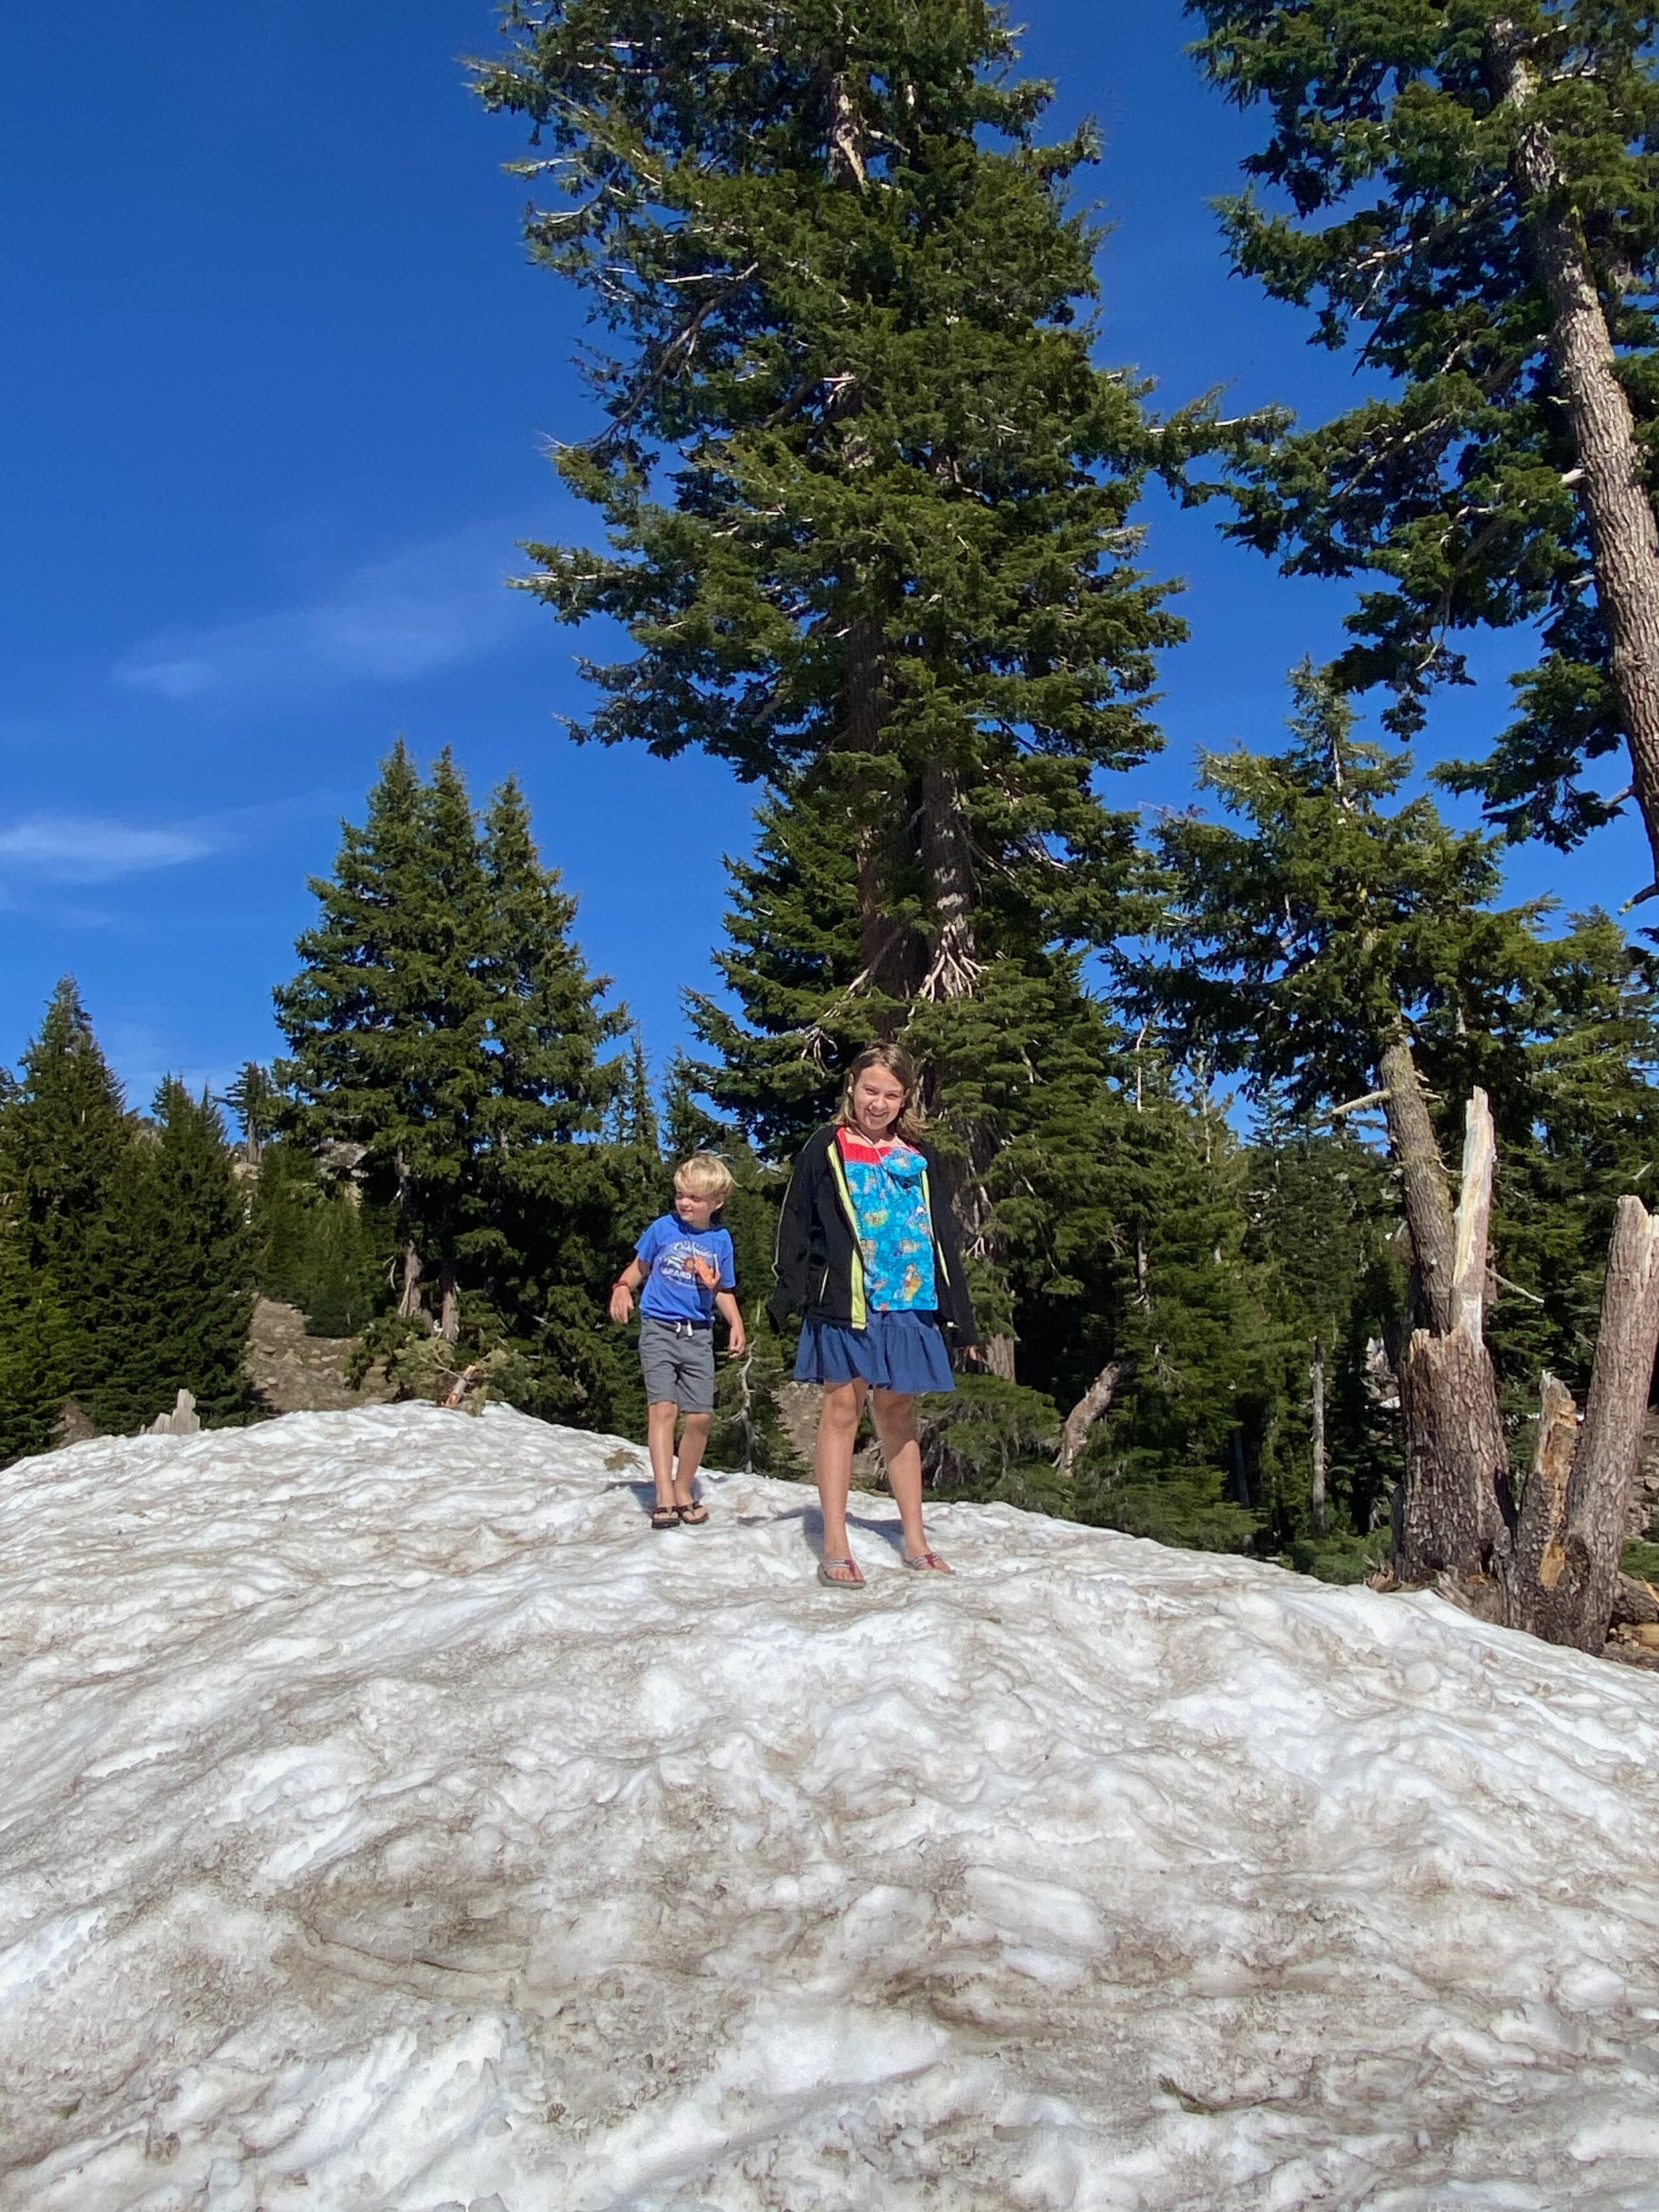 The kids were thrilled to see the snow and we couldn’t hold them back from getting out on to it briefly.  Photo by Karen Boudreaux, June 5, 2021